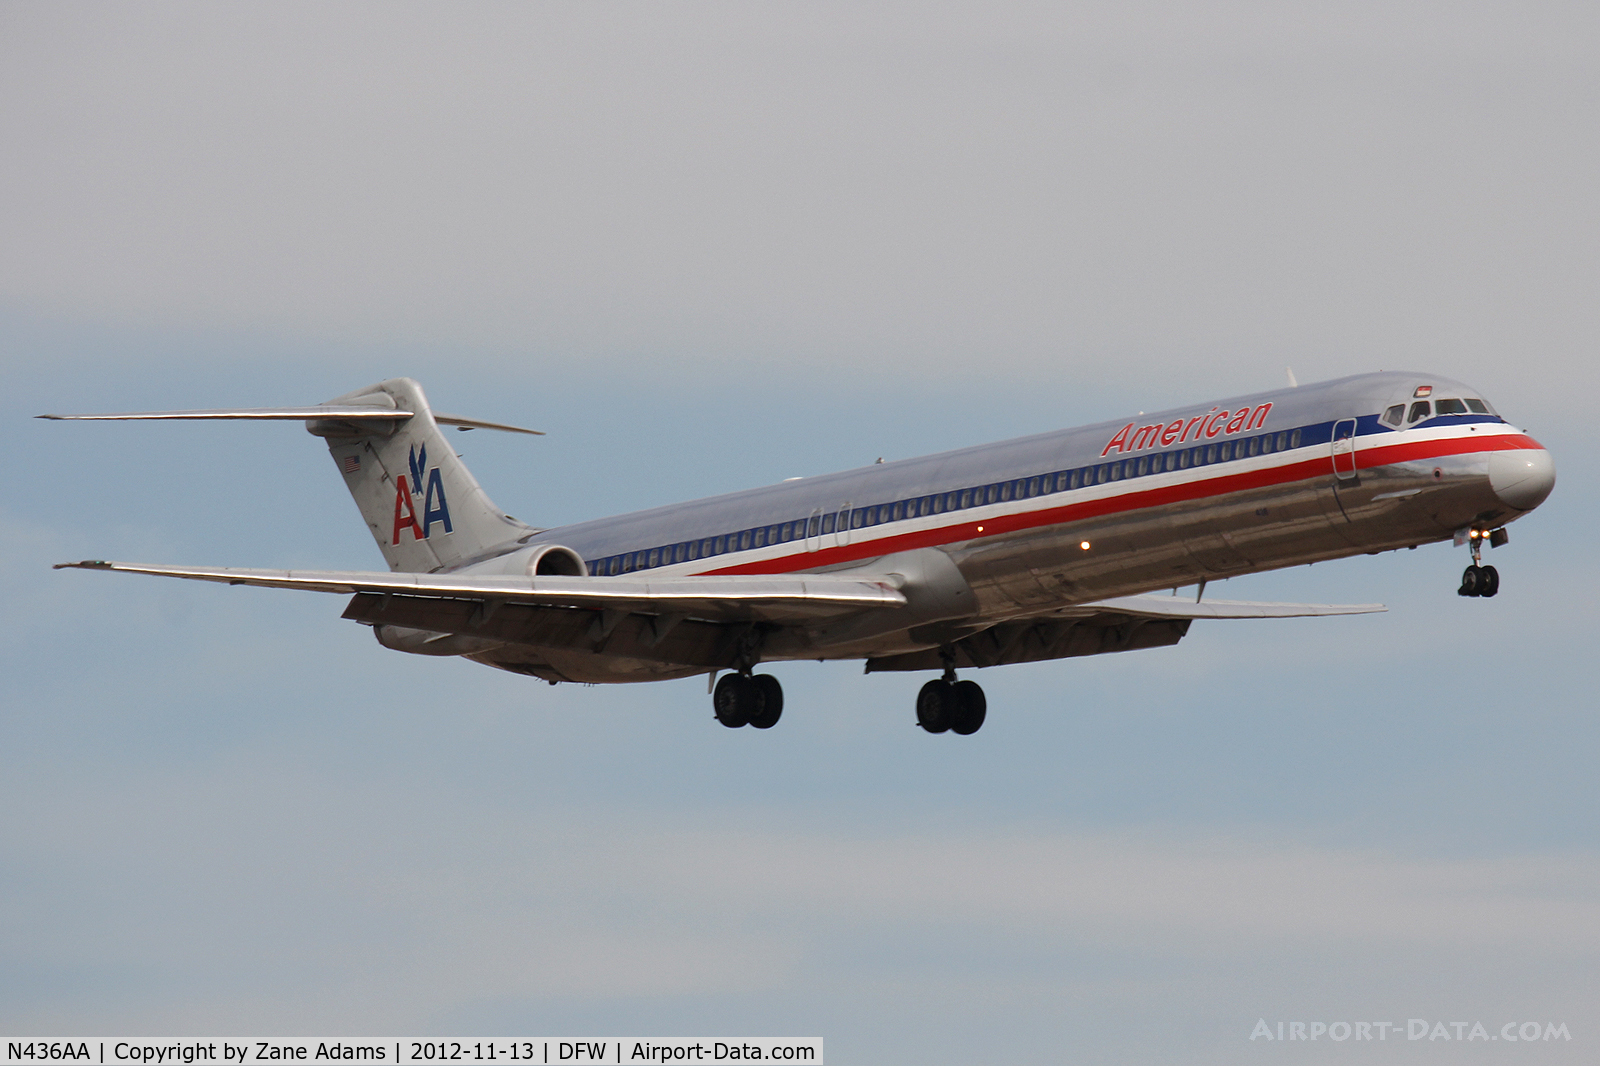 N436AA, 1987 McDonnell Douglas MD-83 (DC-9-83) C/N 49454, American Airlines landing at DFW Airport